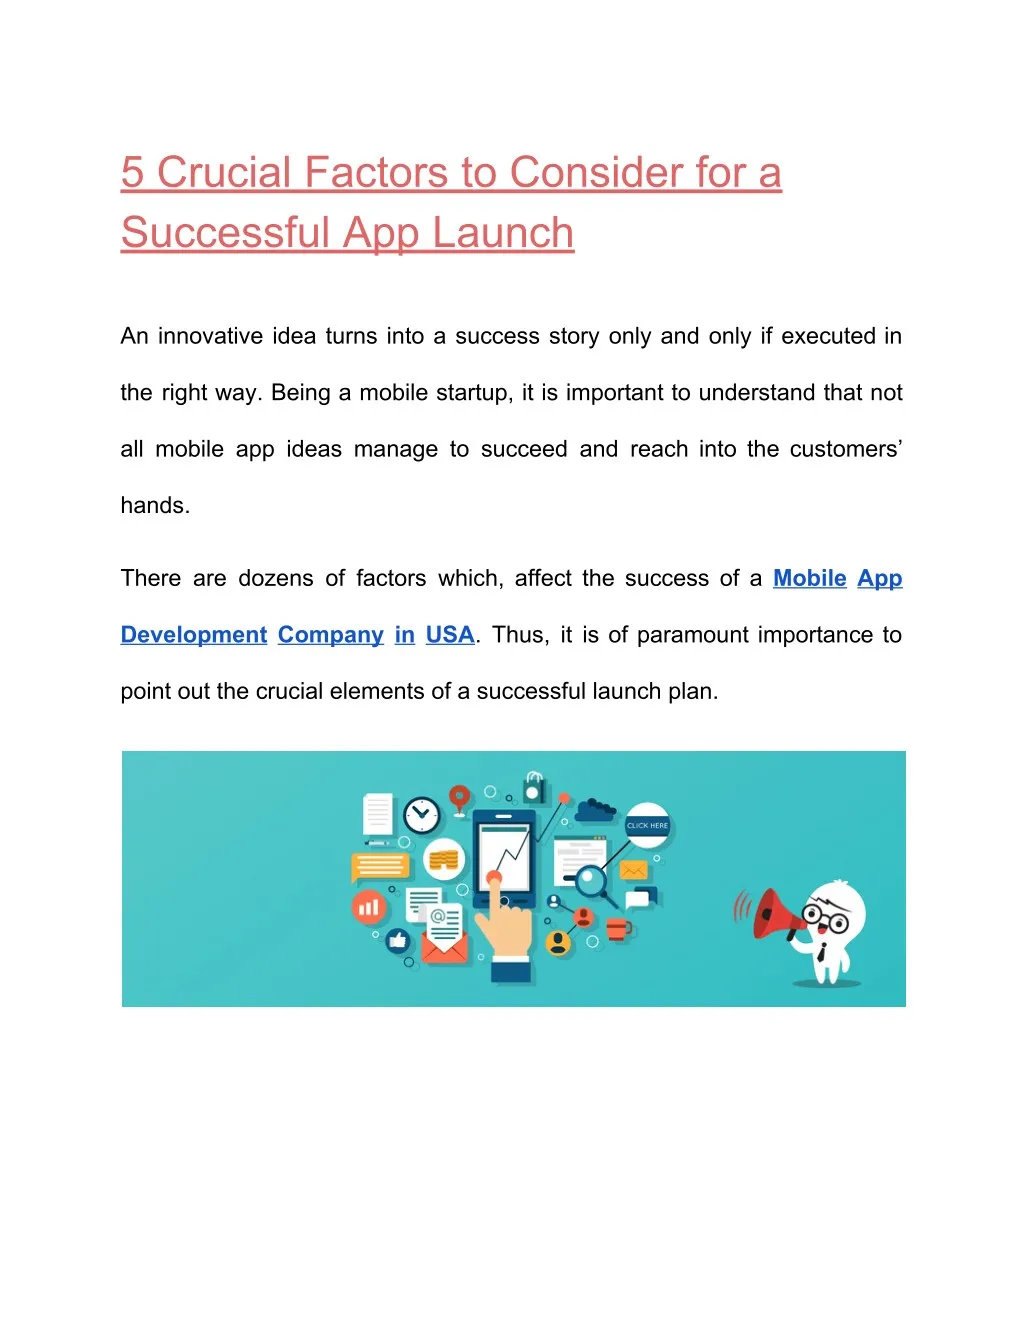 5 crucial factors to consider for a successful